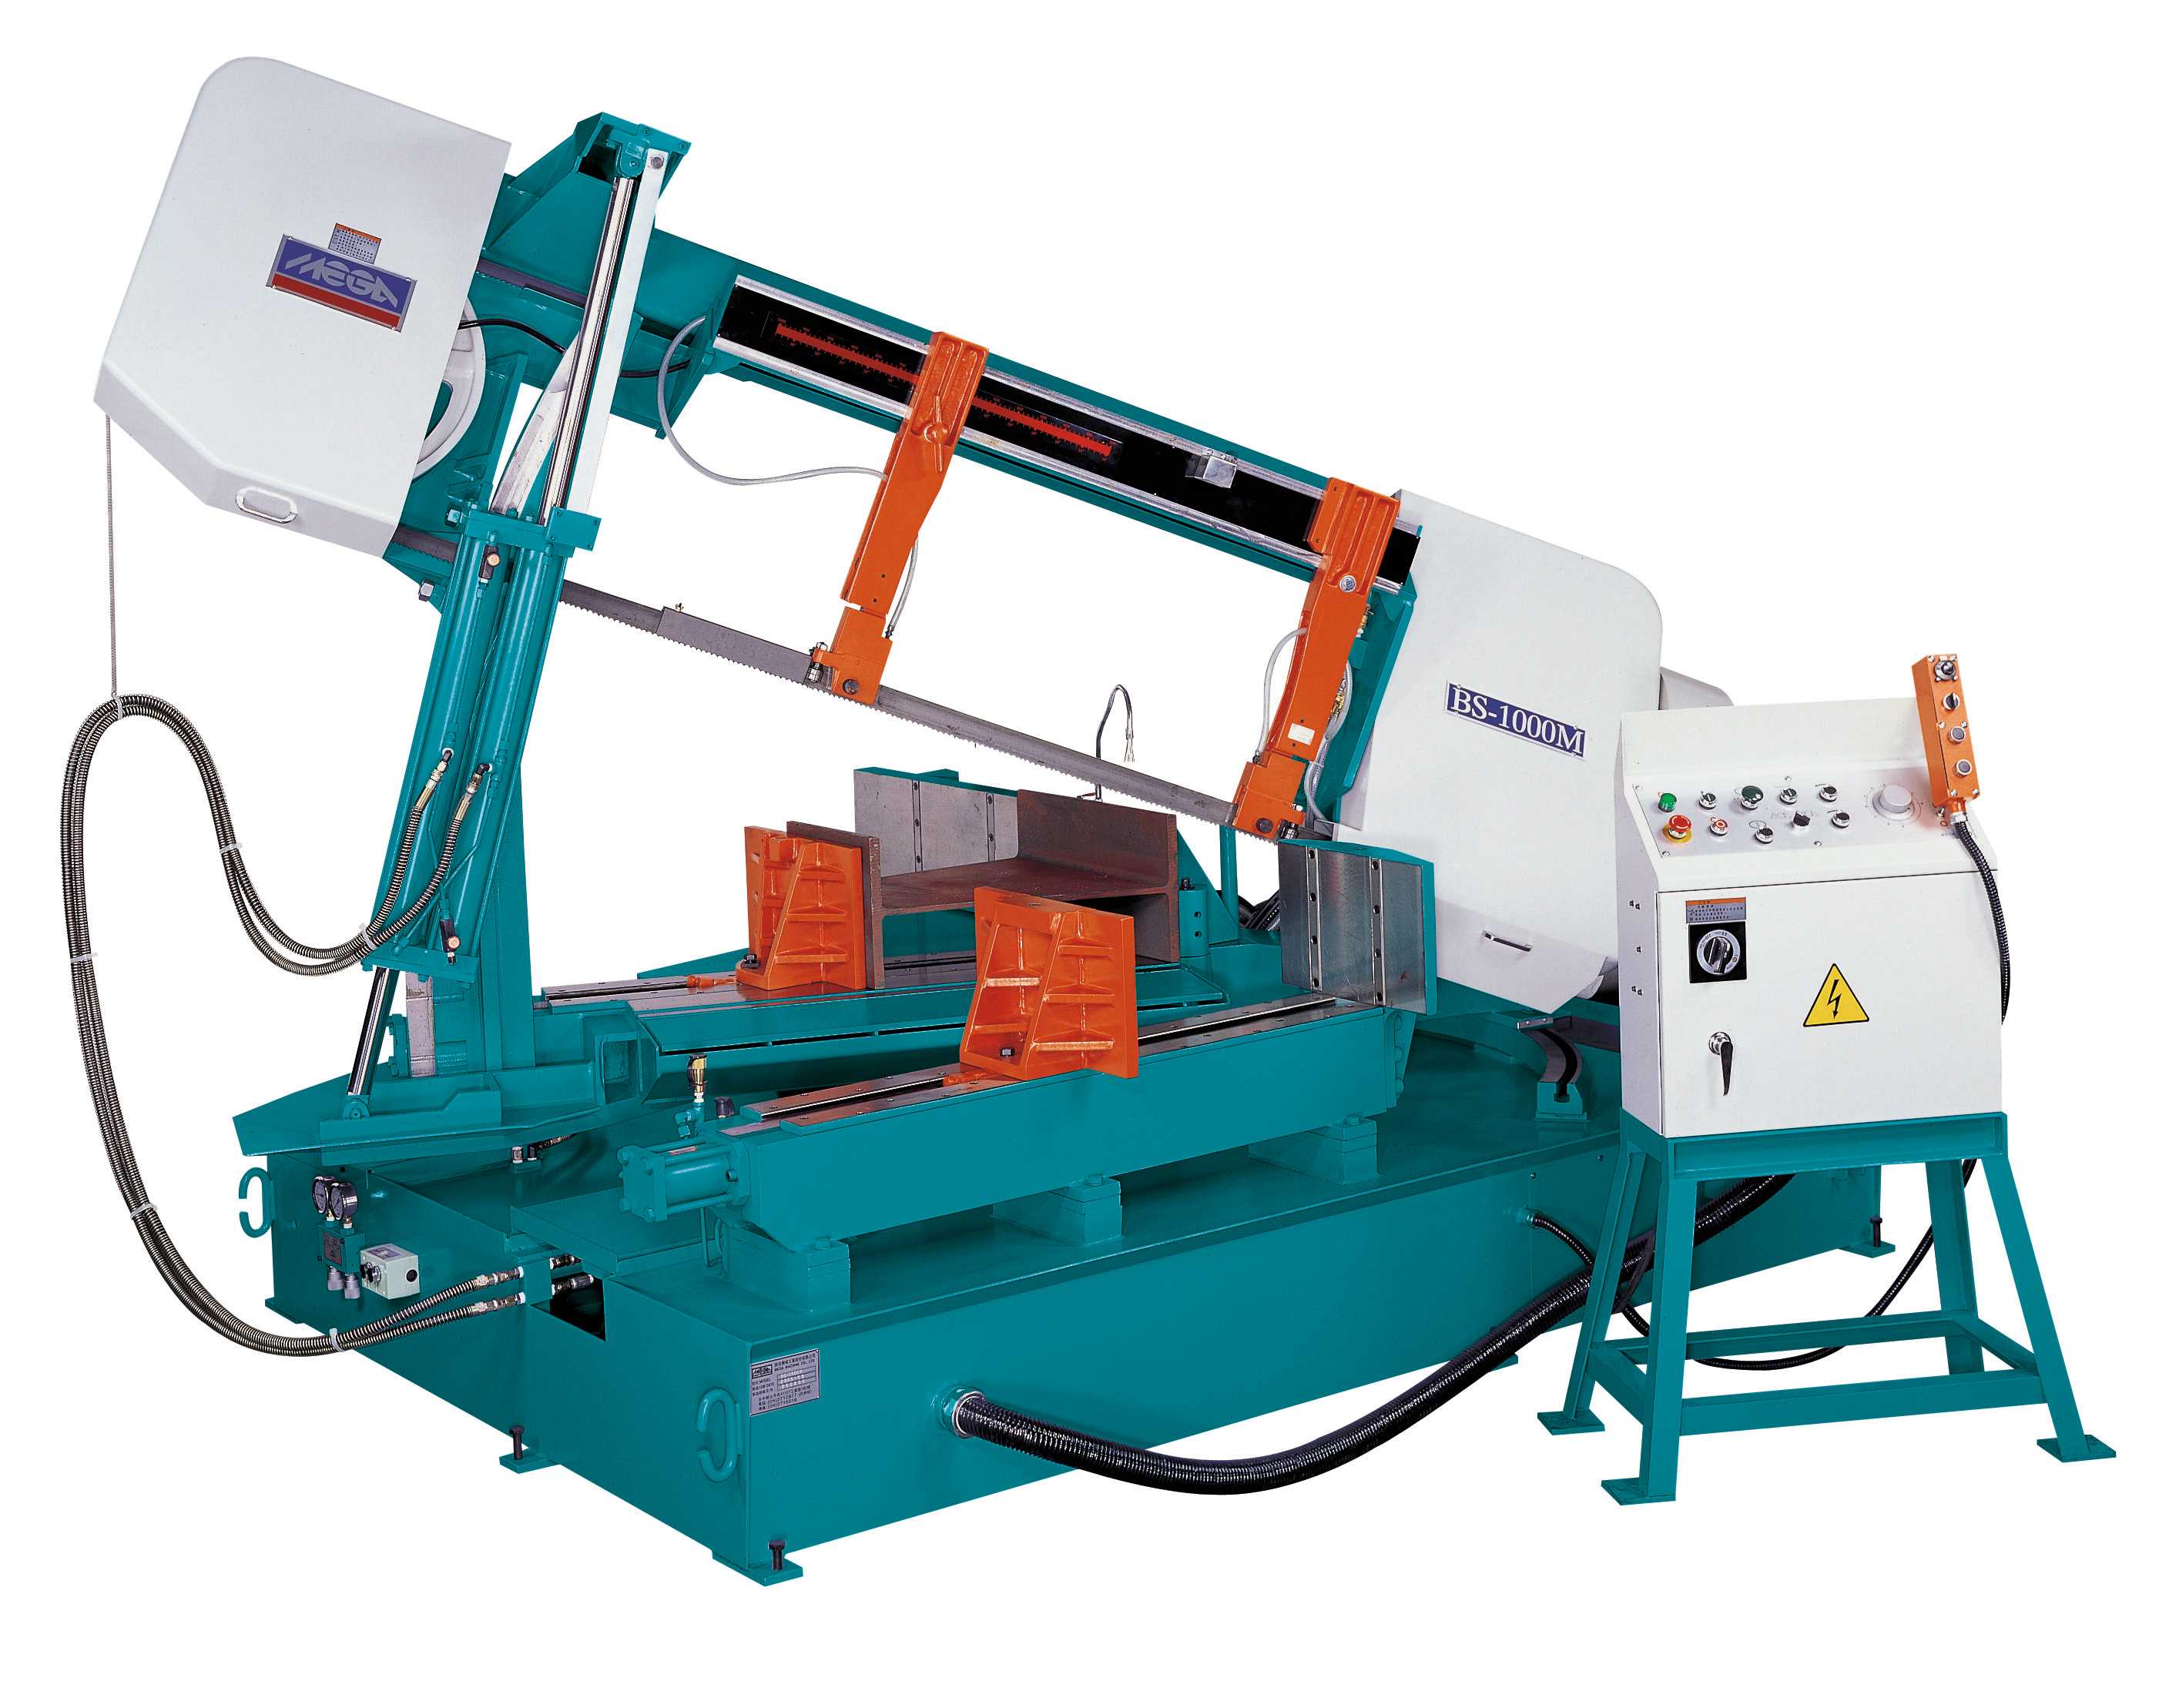 SEMI AUTOMATIC HORIZONTAL BANDSAWS (POWER TURNING TABLE MITRE CUTTING)-BS-1000M